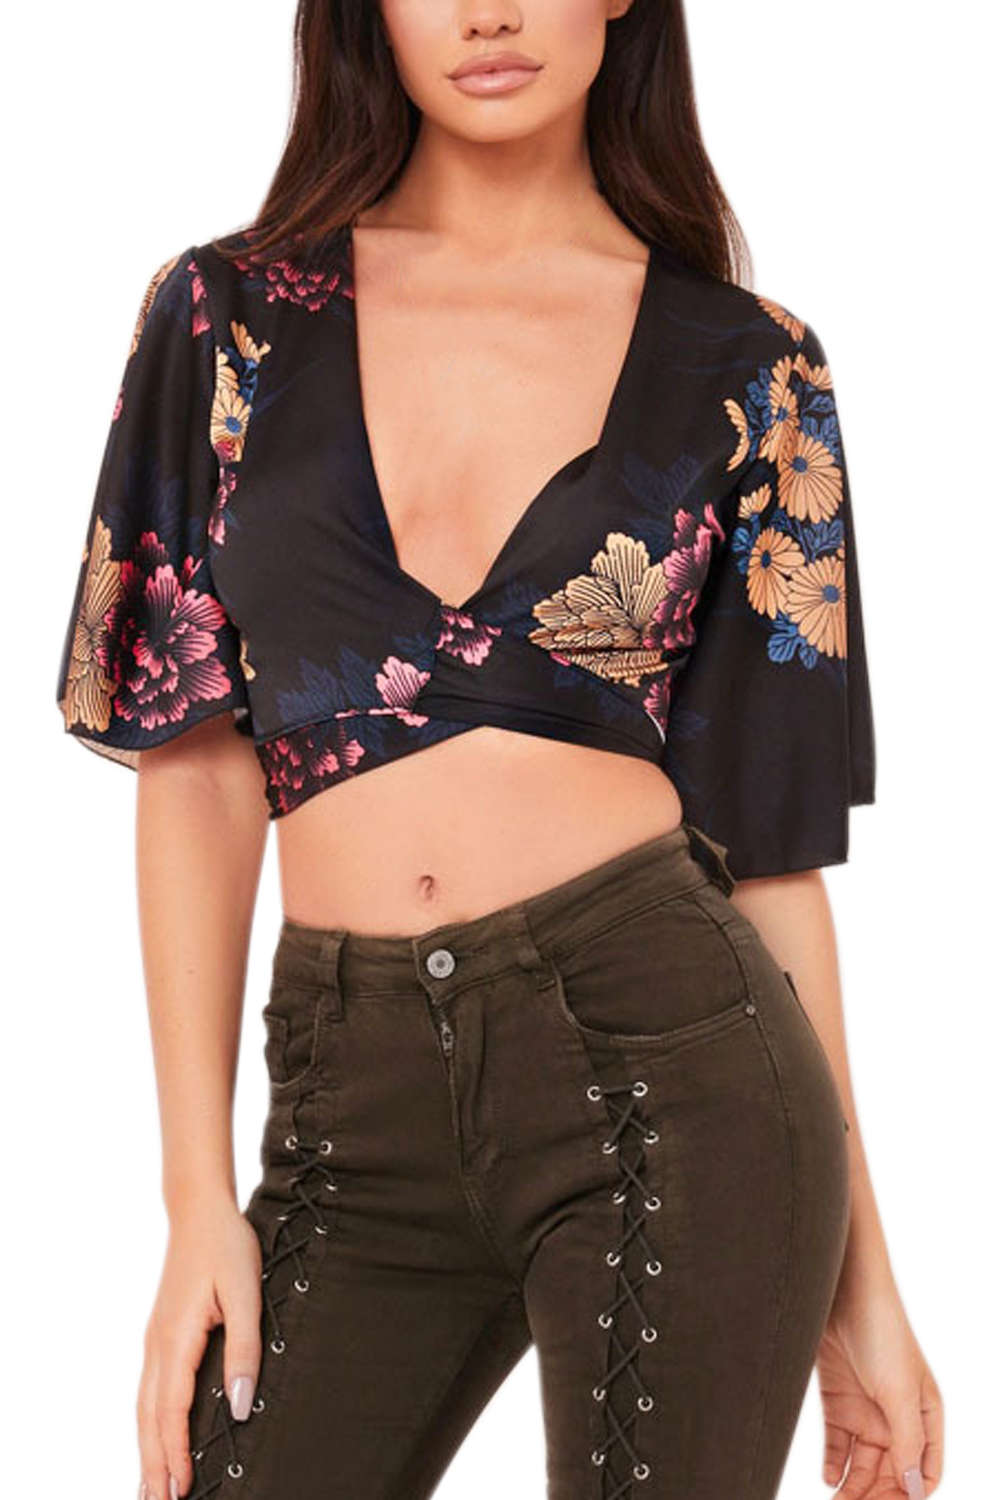 Iyasson Floral Printing Women Bandages Wrapped Crop Top